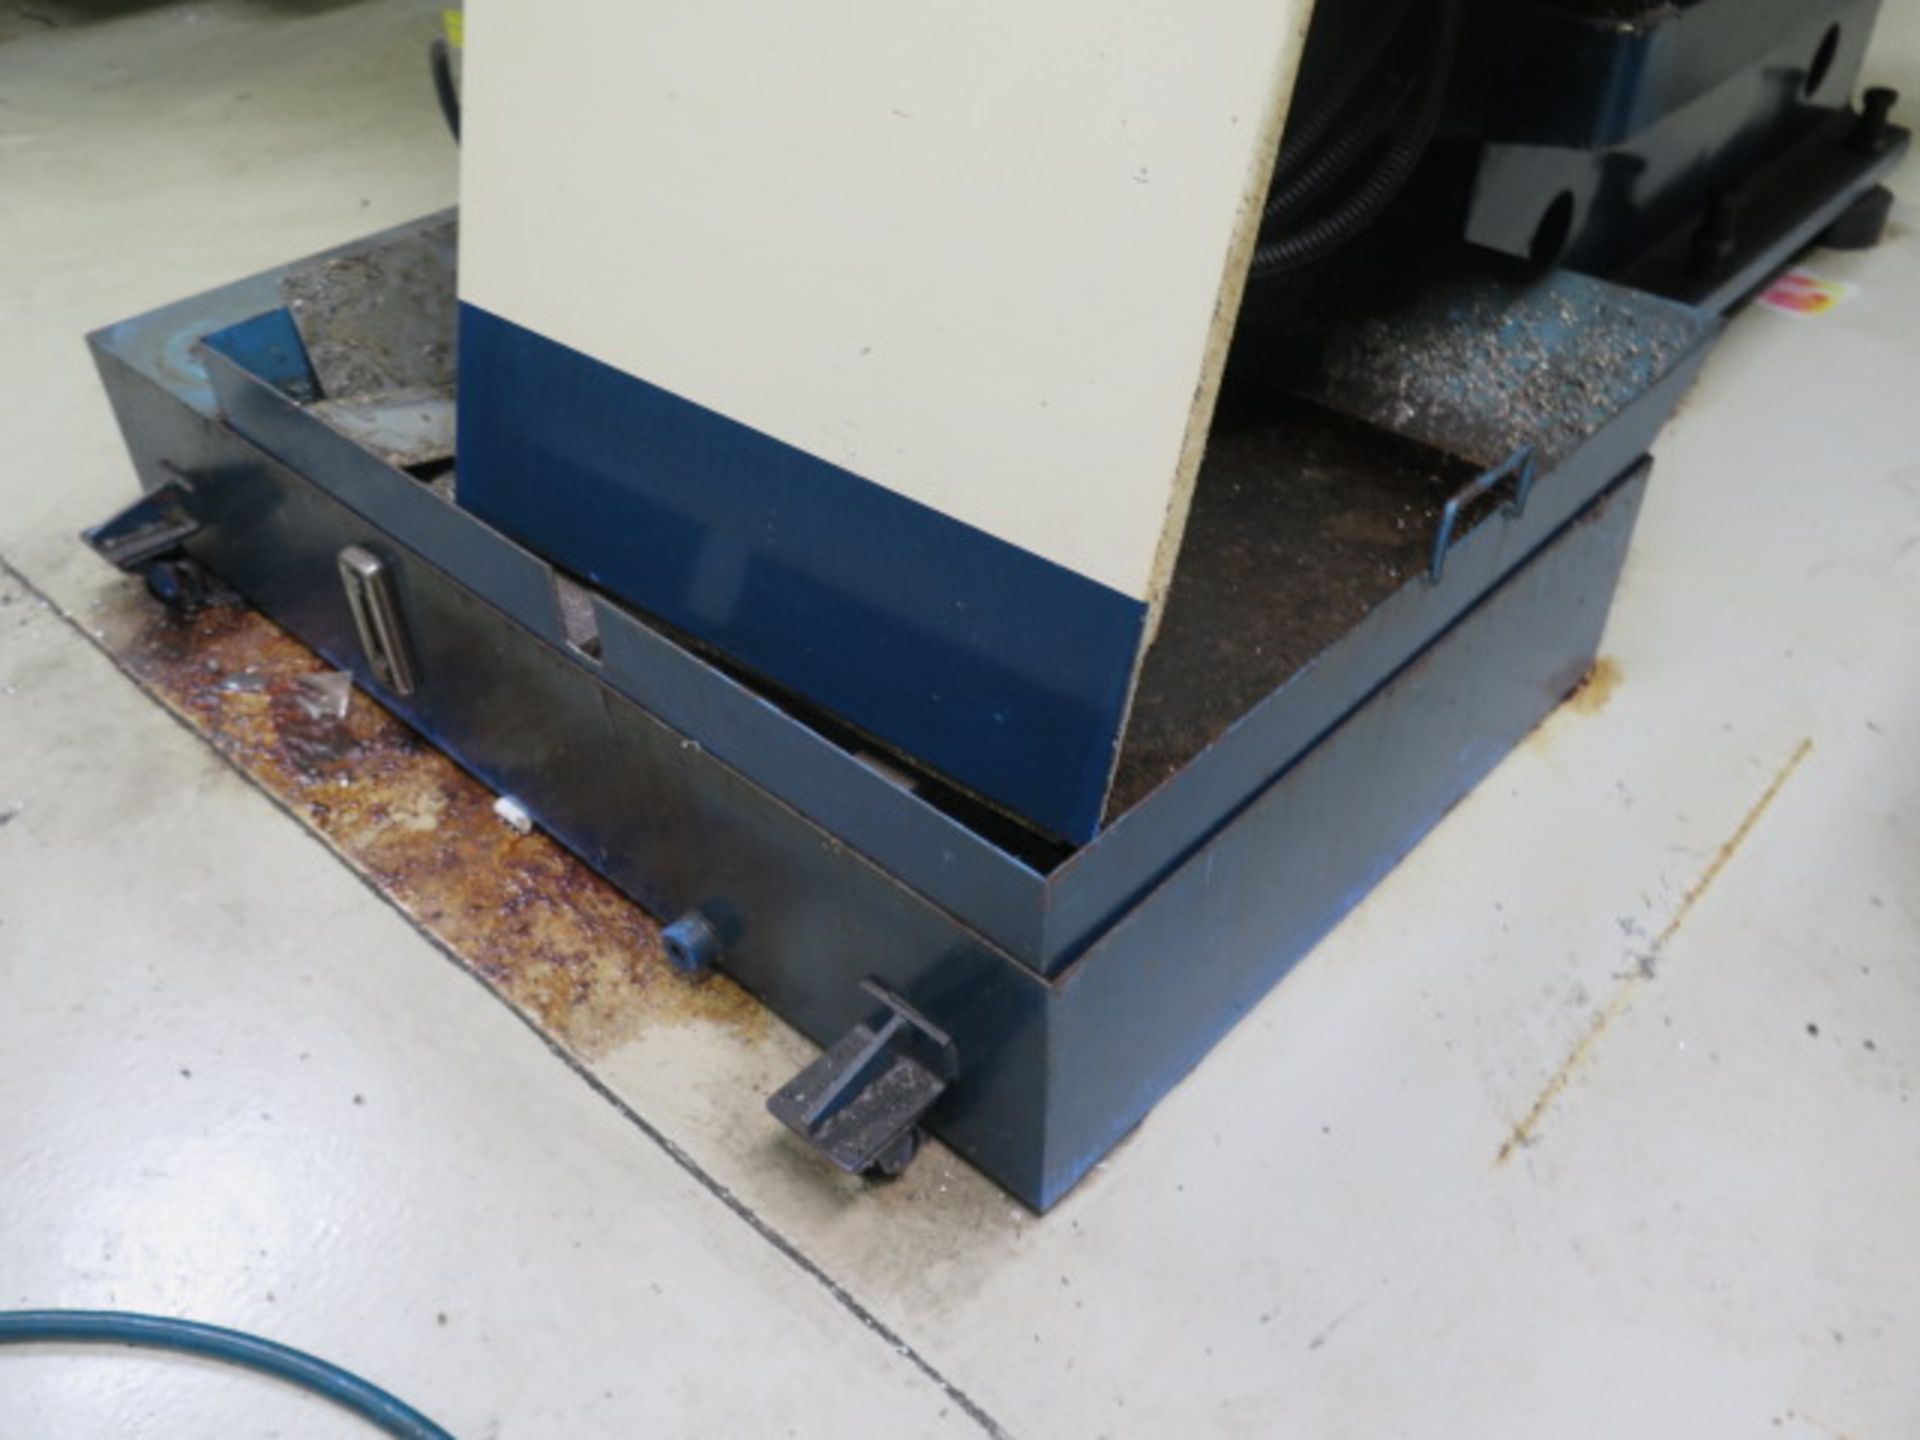 2003 Acra ADT-450 CNC Drilling /Tapping Center s/n MA5V0012285 (NEEDS REPAIR) w/ Mits 50M, OLD AS IS - Image 13 of 14